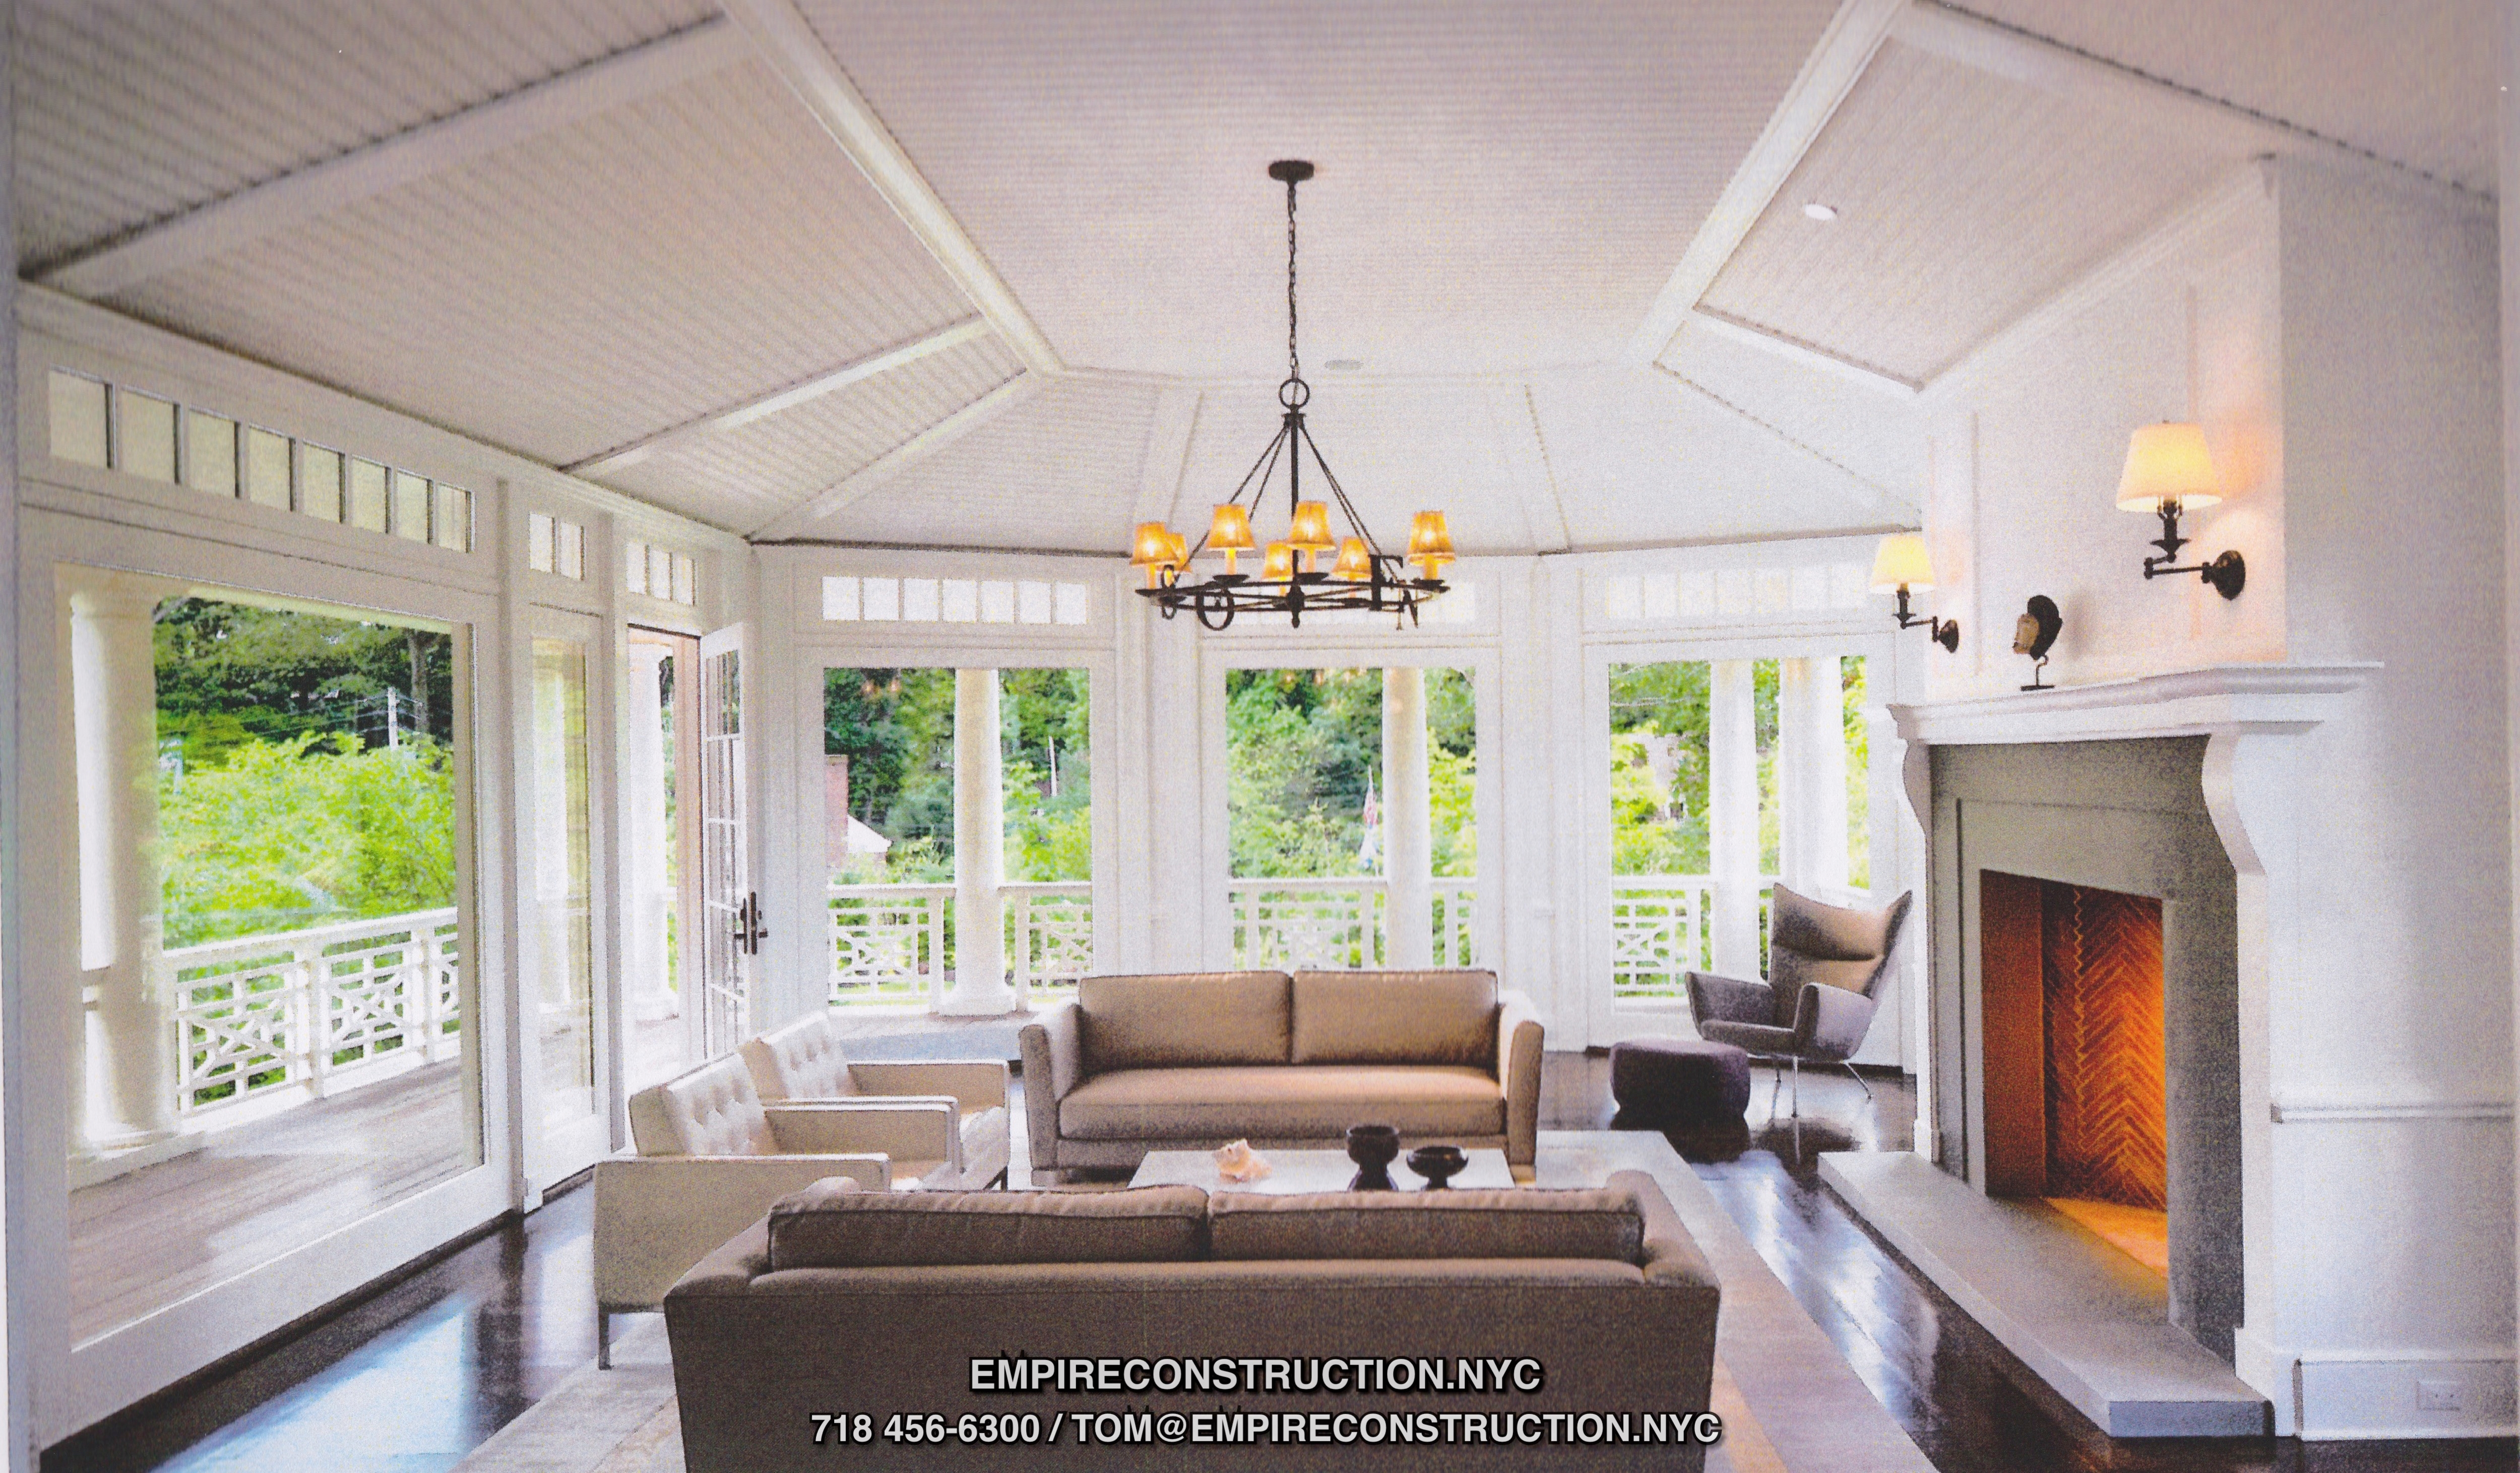 Interiors, Living Rooms, Libraries by Empire. Bring your ideas and we will make them into a reality. Libraries, cabinets, european furniture, shelves, drawers, vanities,  entertainment centers,  wardrobes, dressers, storage chests, fireplace mentols build inns, tables, chairs,  beds, floors, paneling, running trims,  casework, decorative woodworking, Planning, interior designing, construction and installation, we will assist you at all steps of the way. 